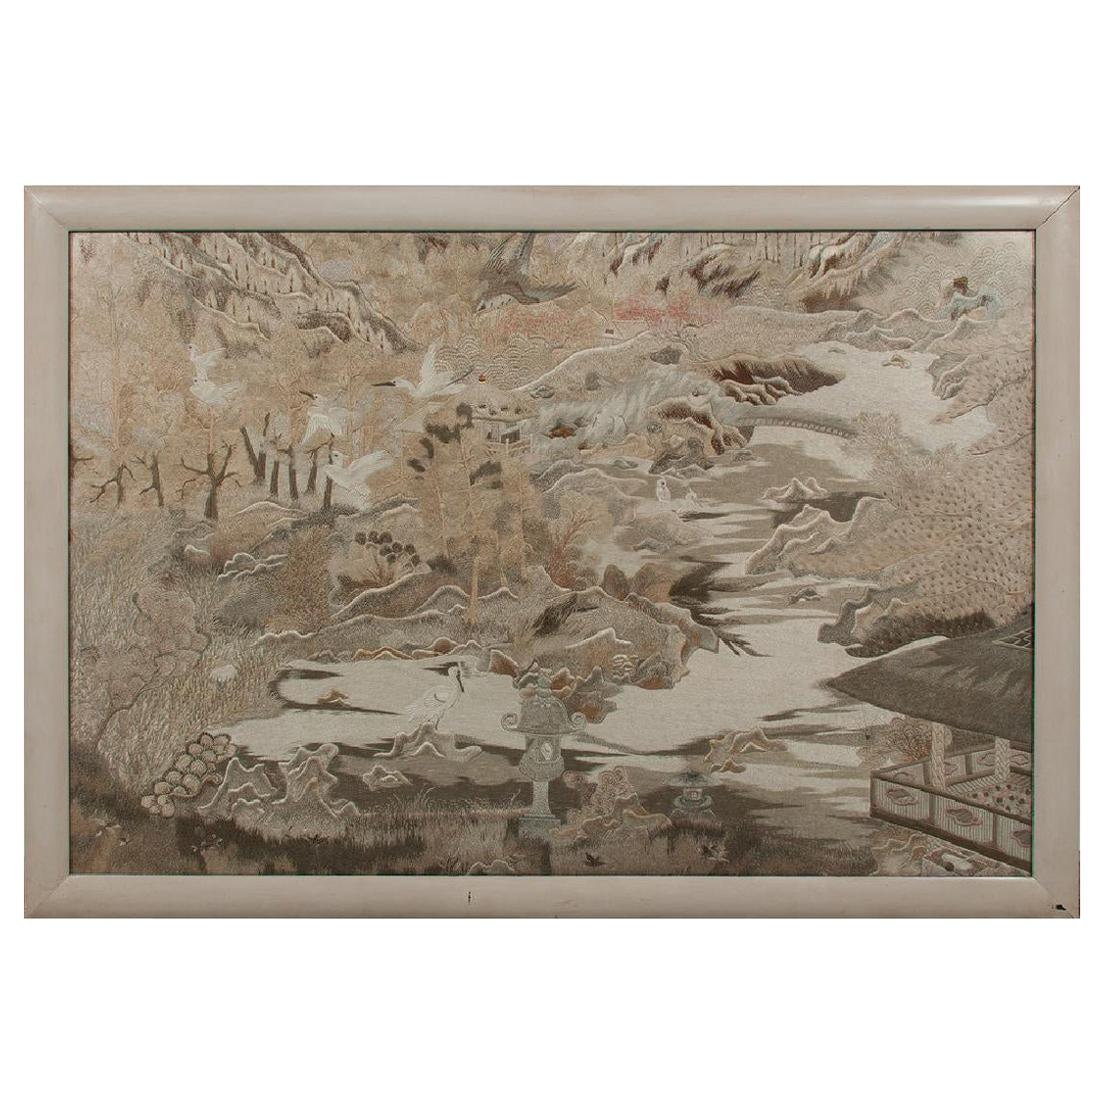 Large Framed Japanese Embroidery Textile Panel Meiji Period